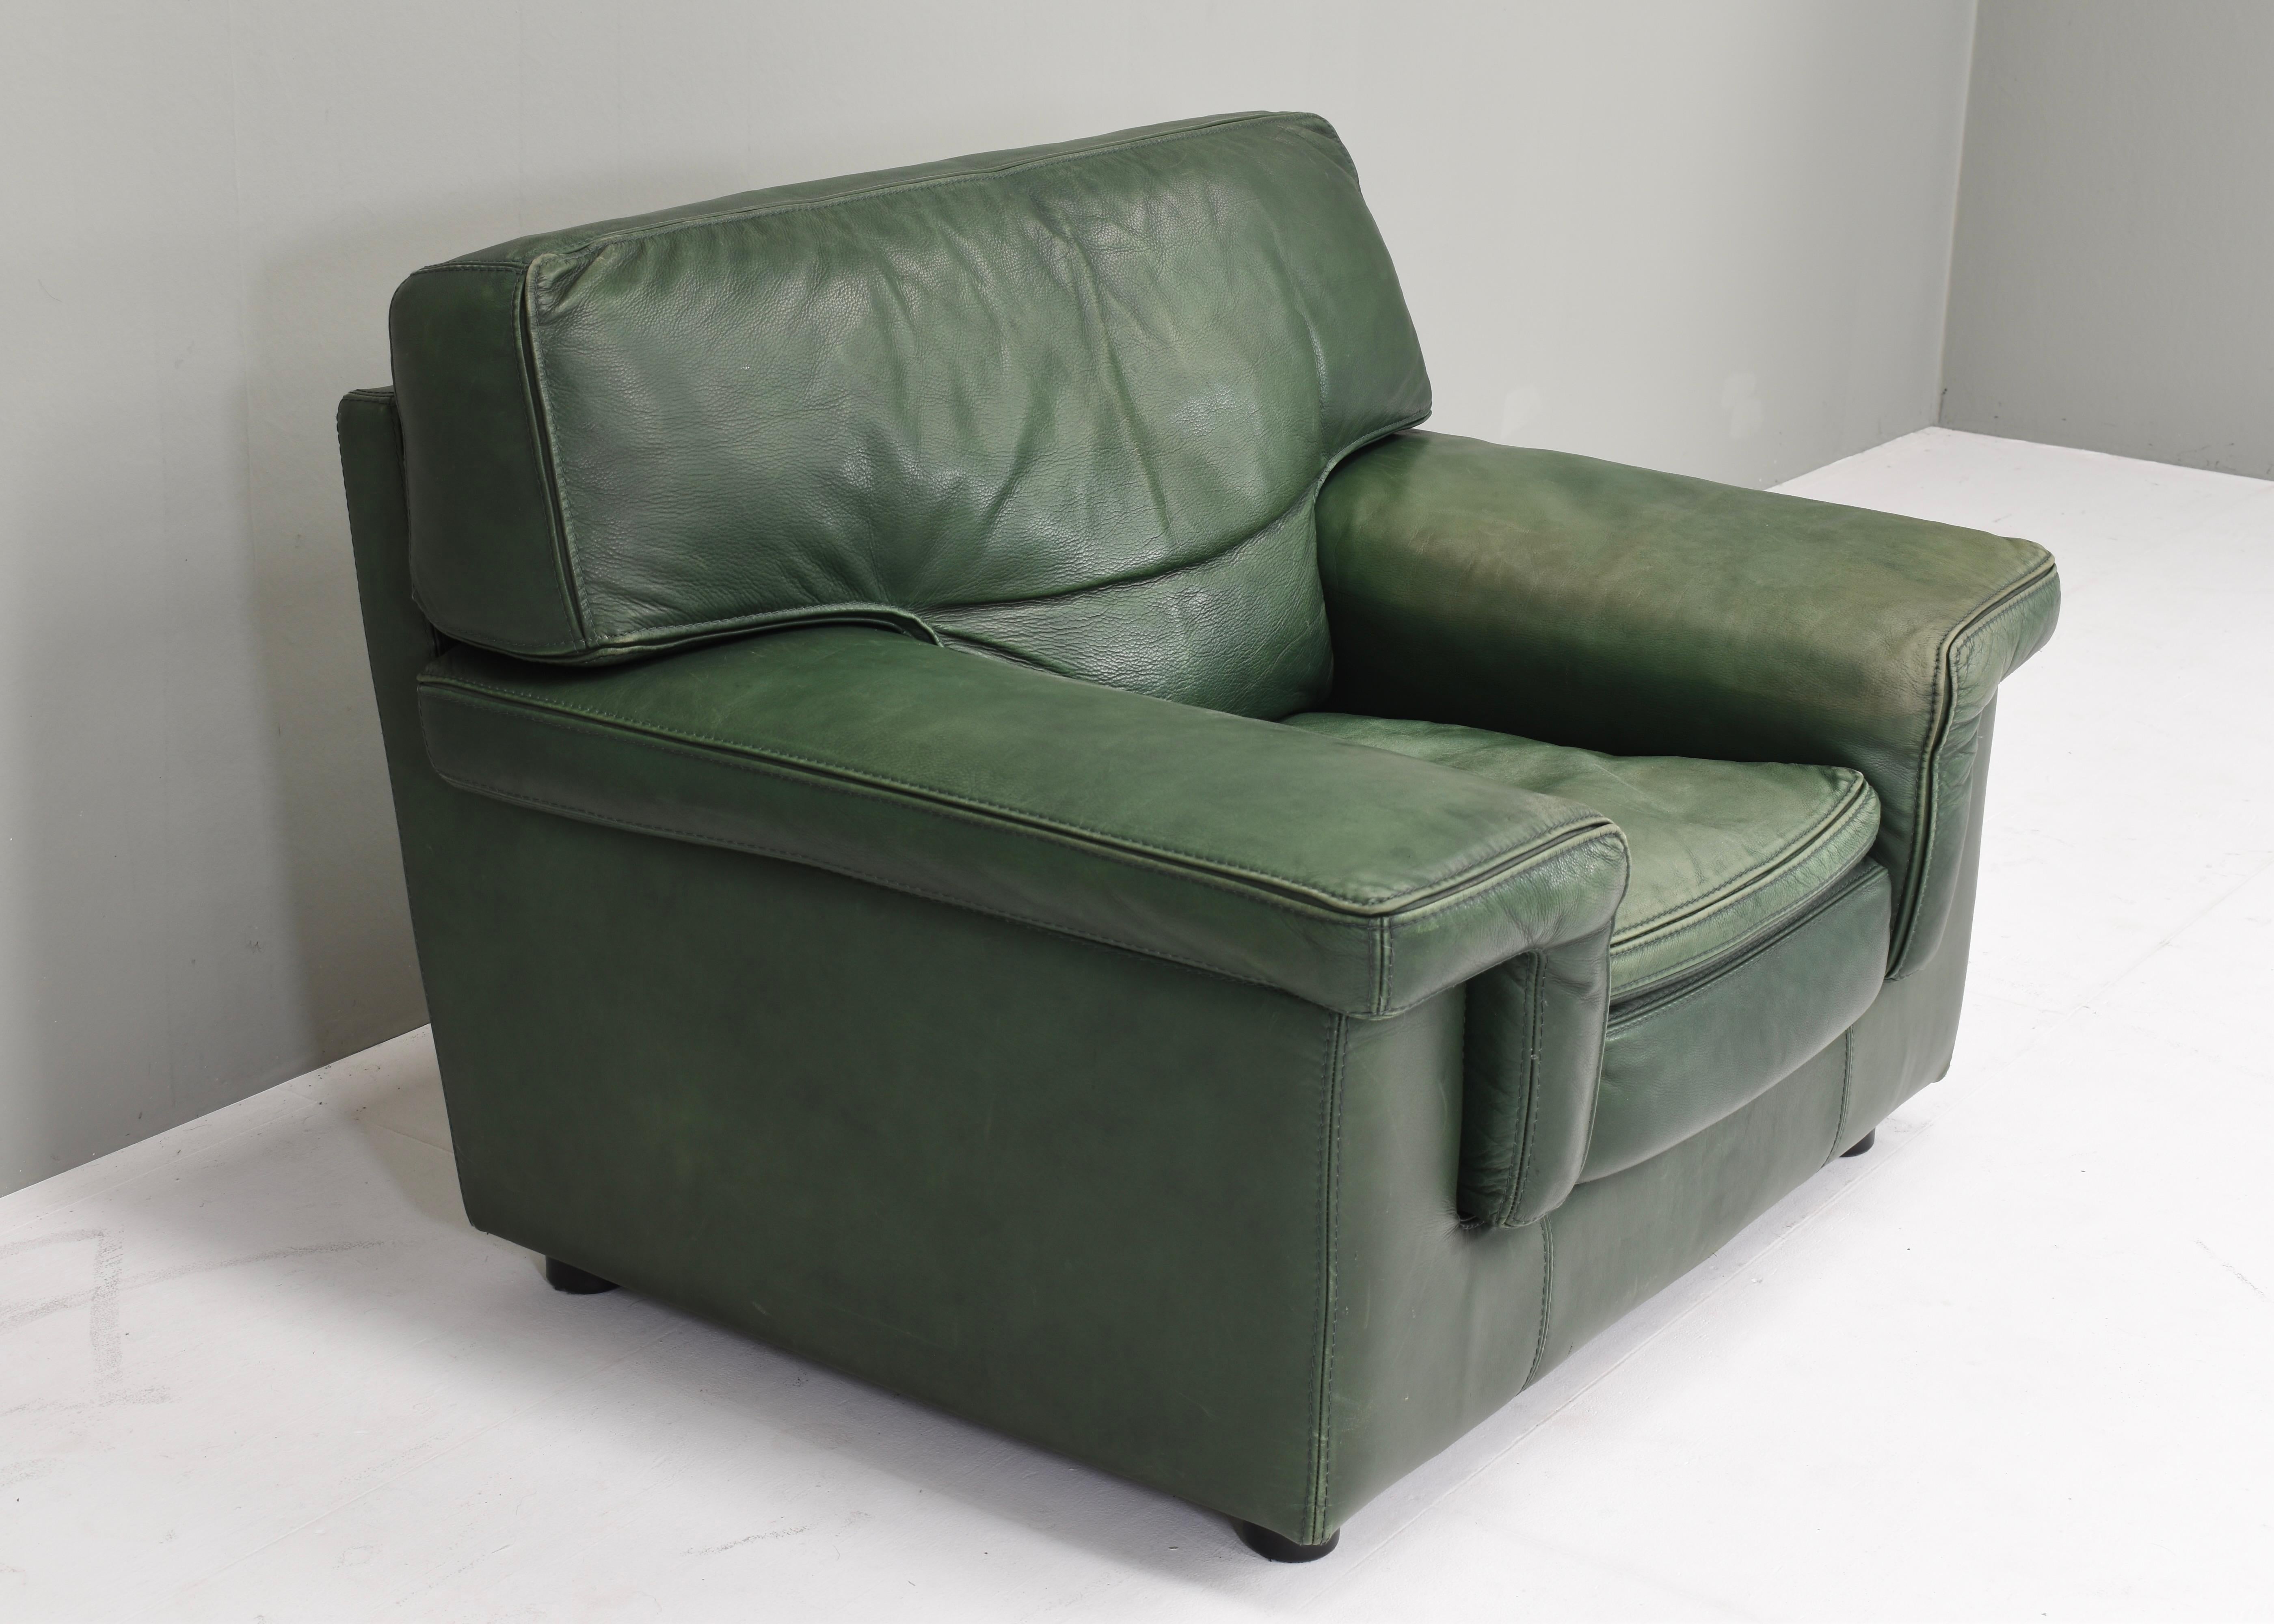 Roche Bobois Lounge Armchair in Original Green Patinated Leather – circa 1970 For Sale 1